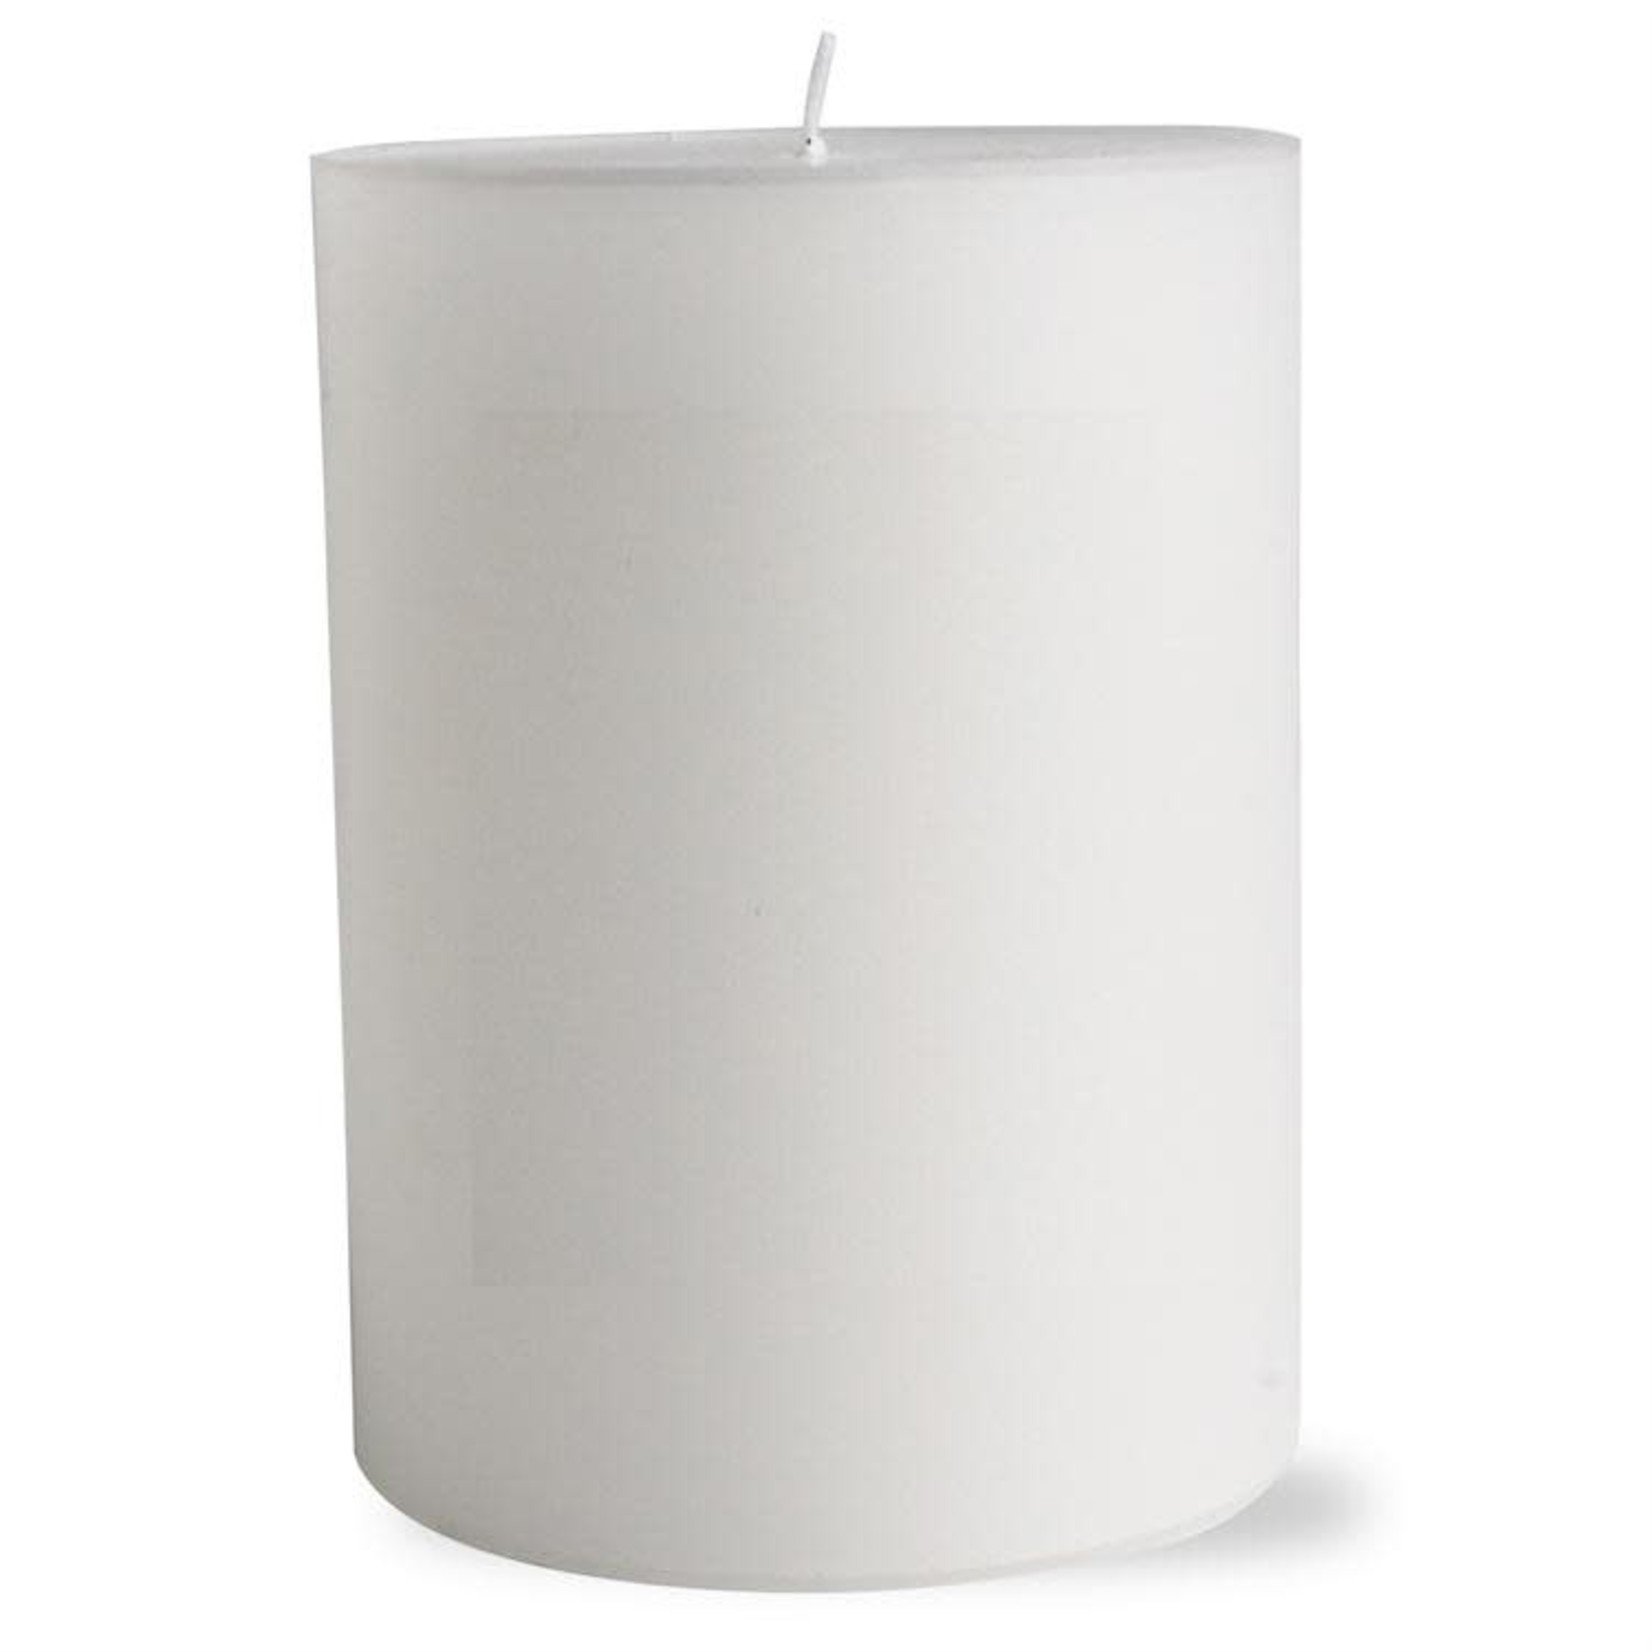 Mickler & Co. White Pillar Candle, Unscented